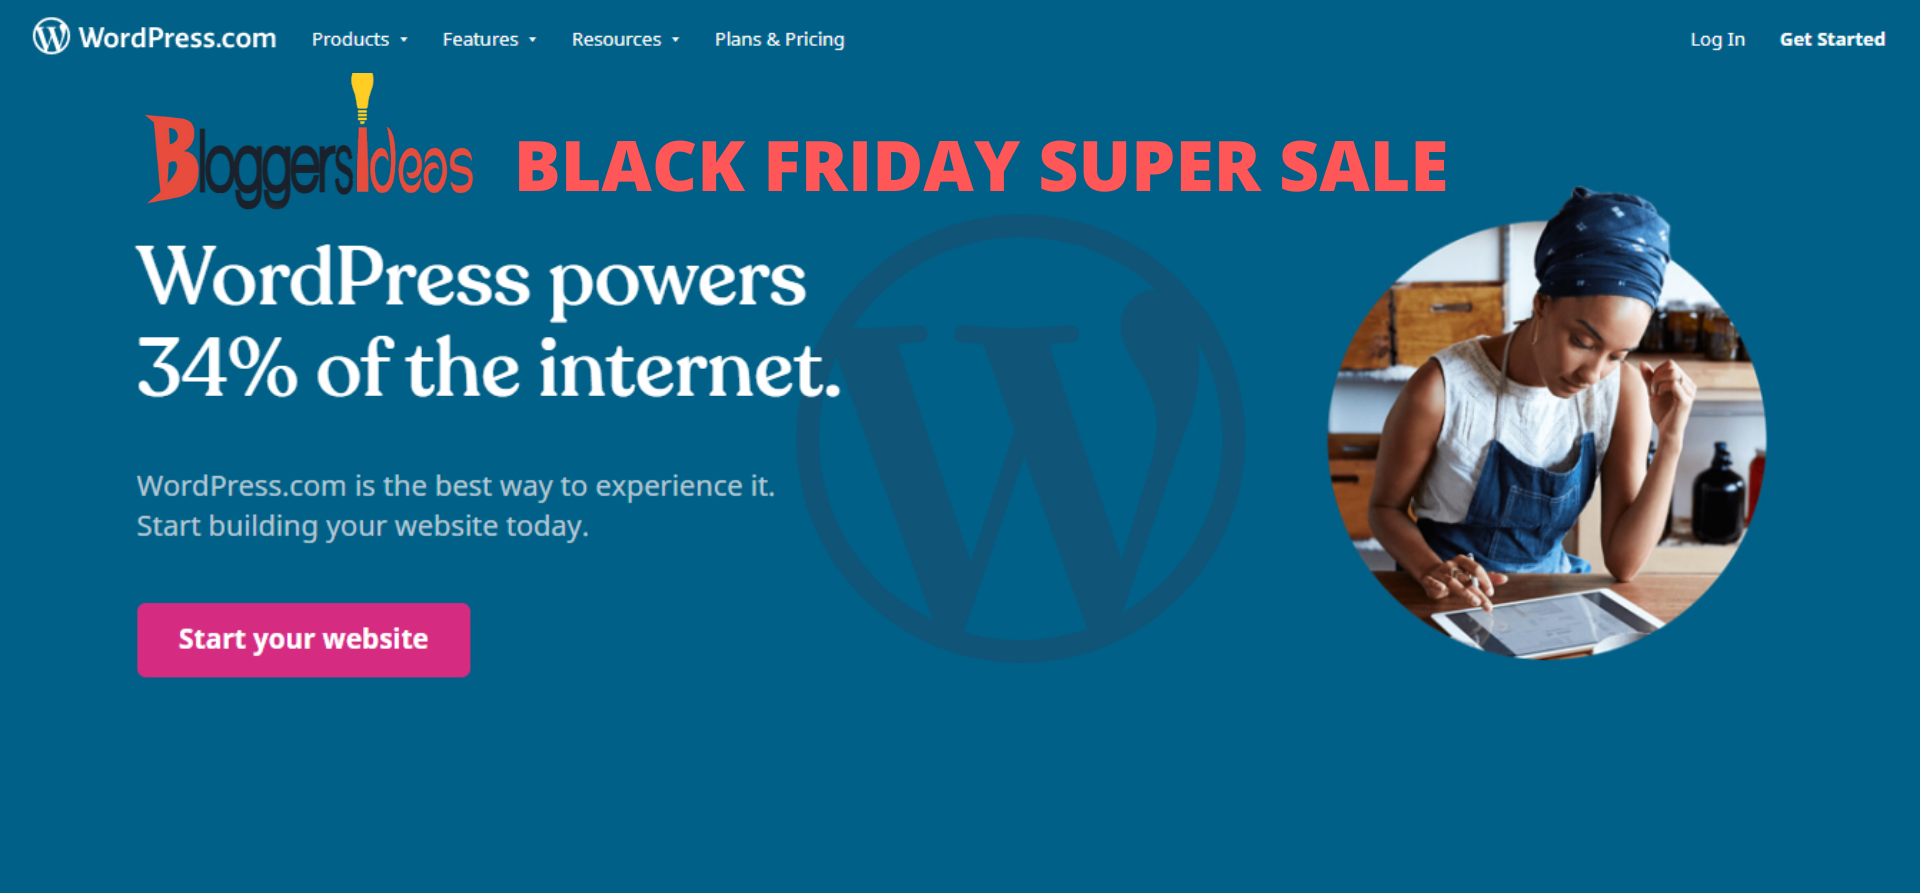 WordPress Black Friday and Cyber Monday deals